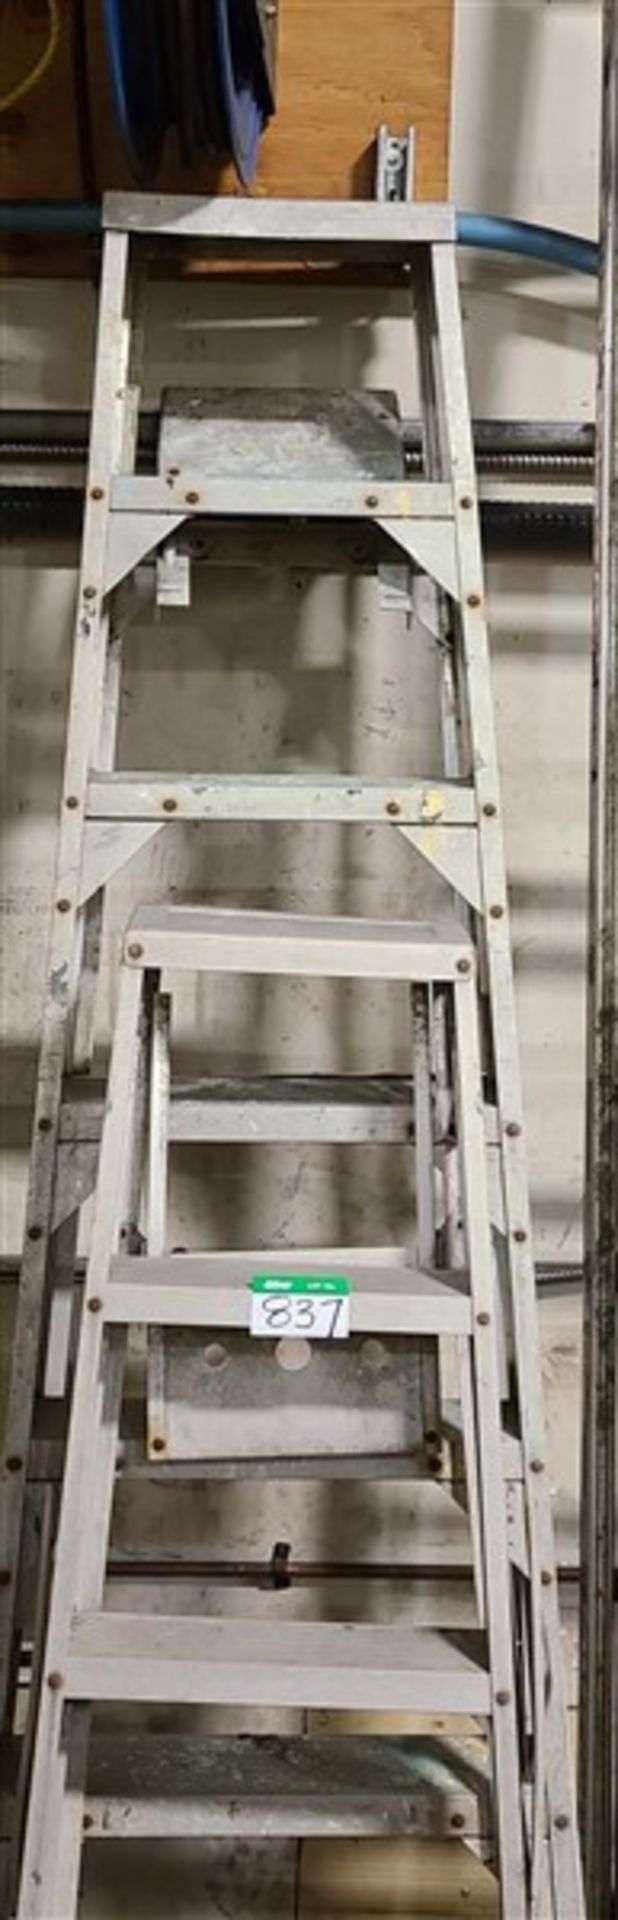 2 STEP LADDERS 8 FT., 6 FT.